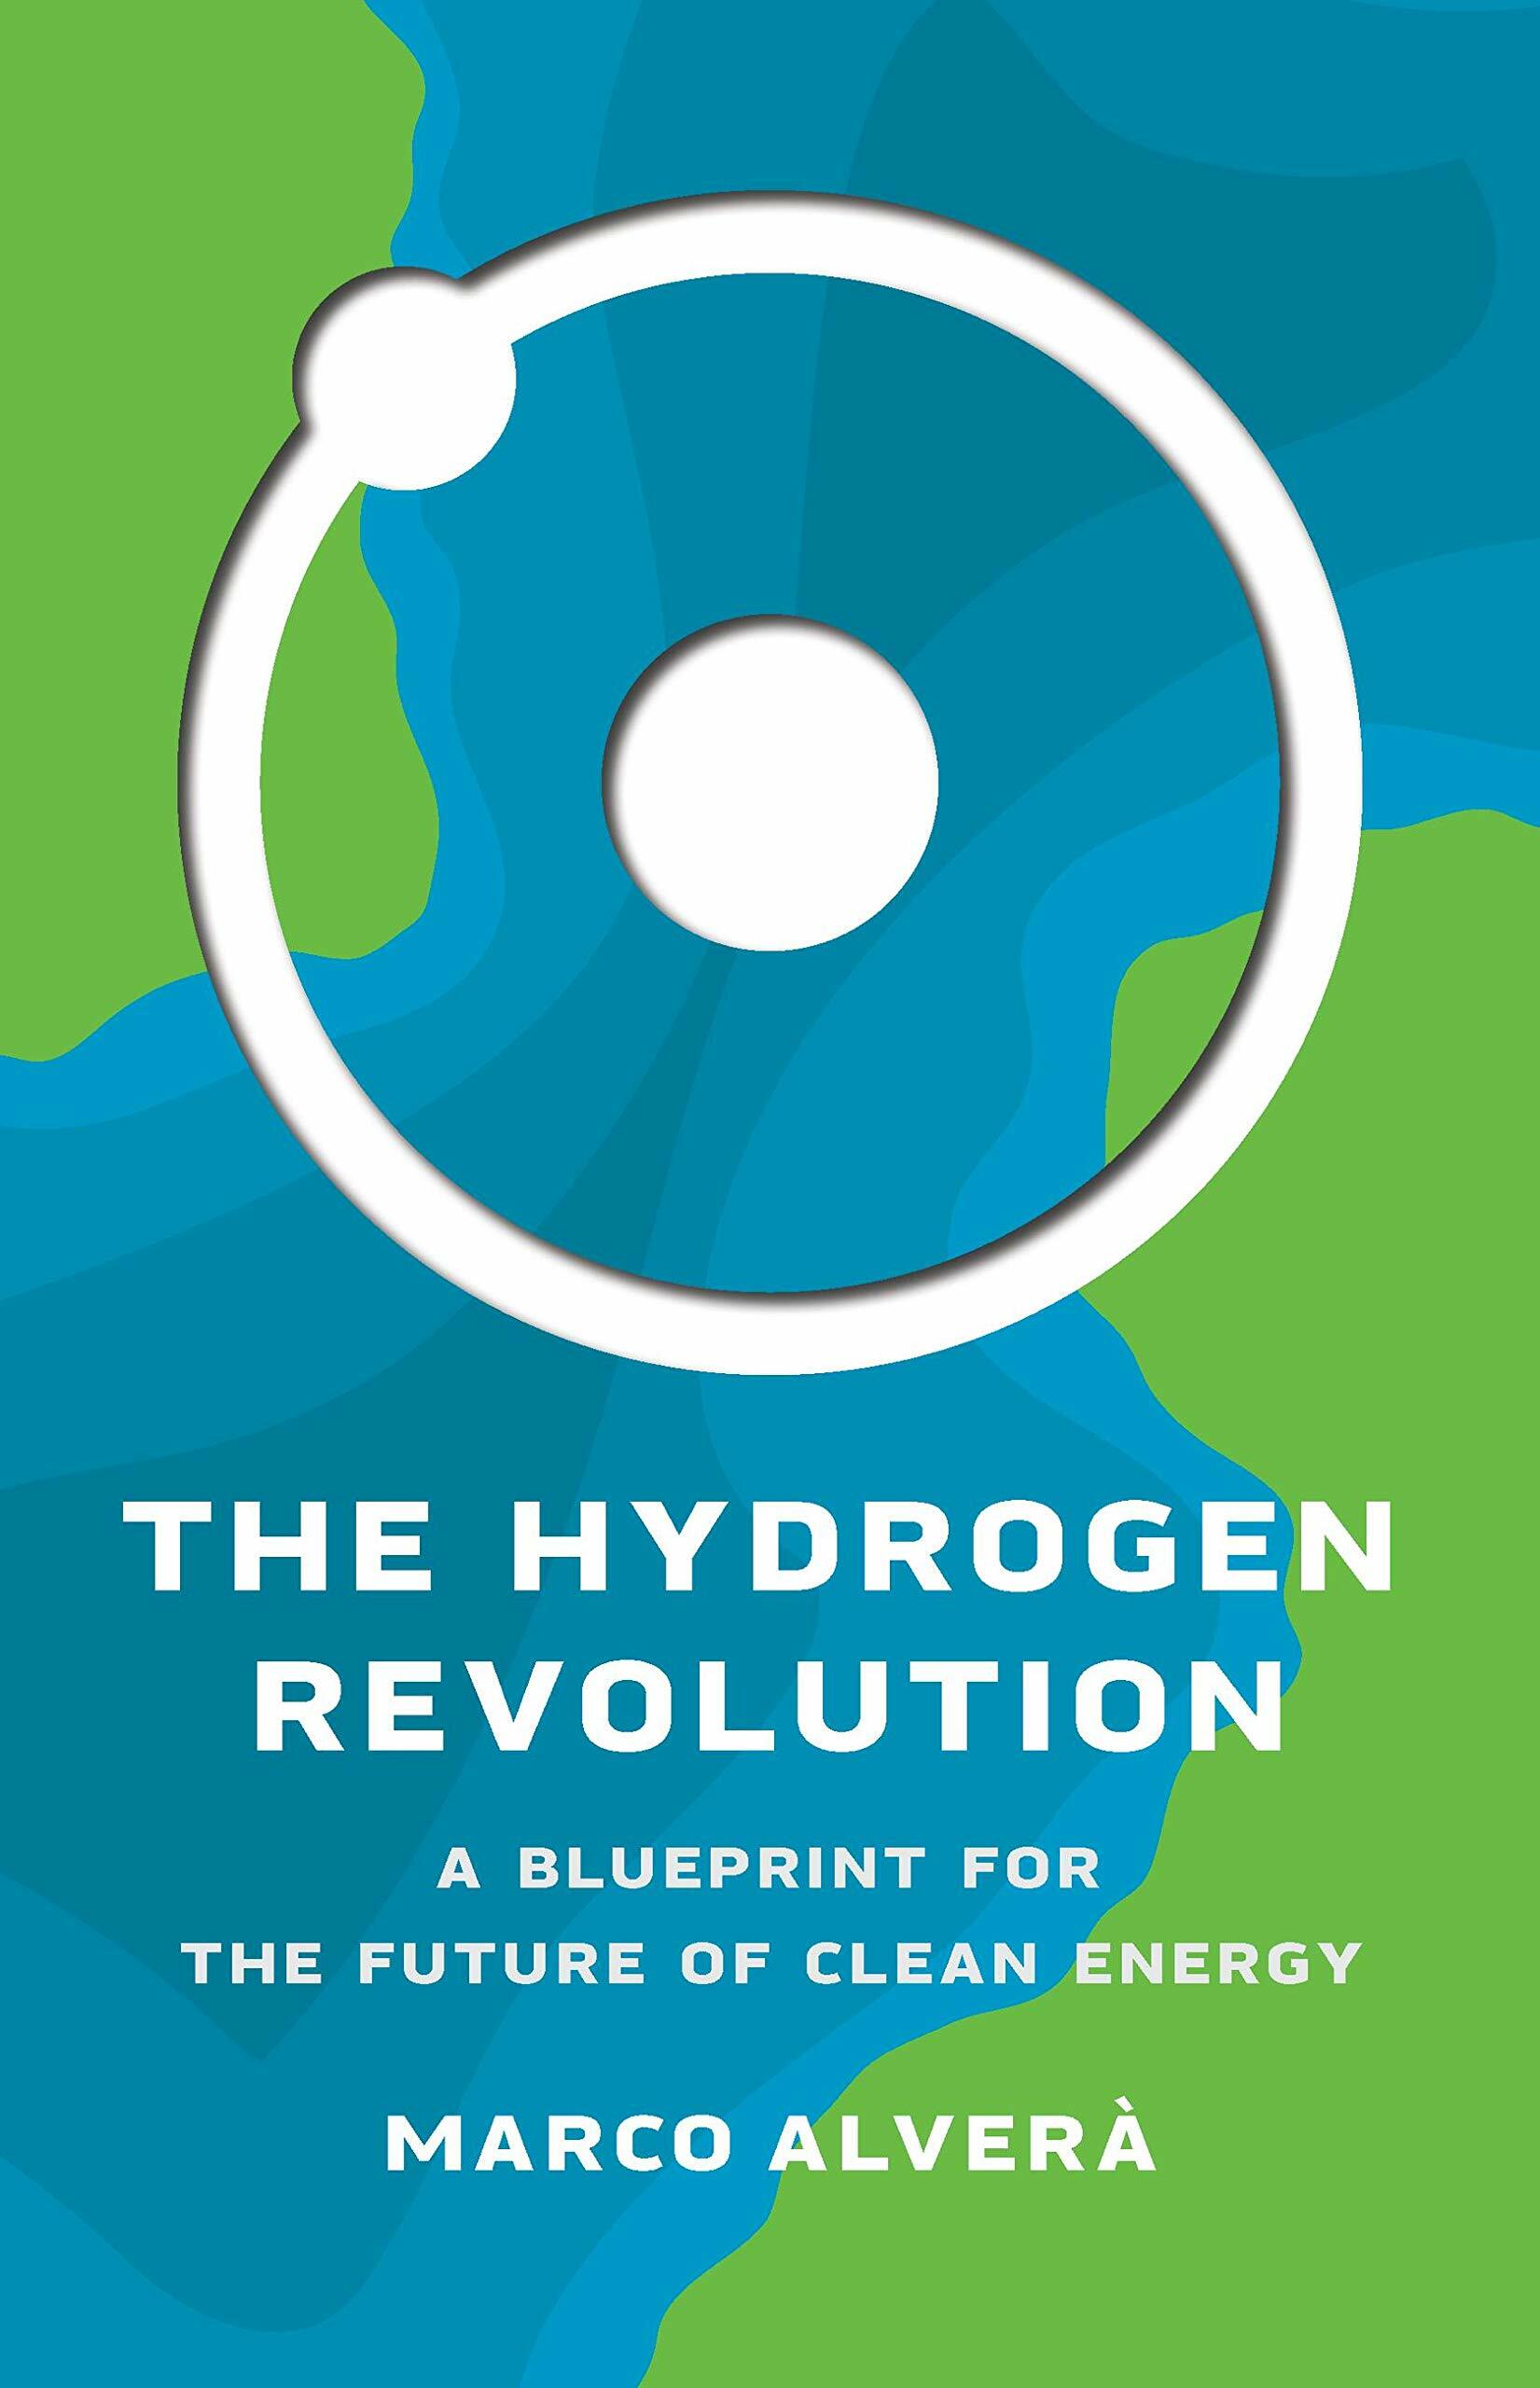 The Hydrogen Revolution: A Blueprint for the Future of Clean Energy (Hardcover)